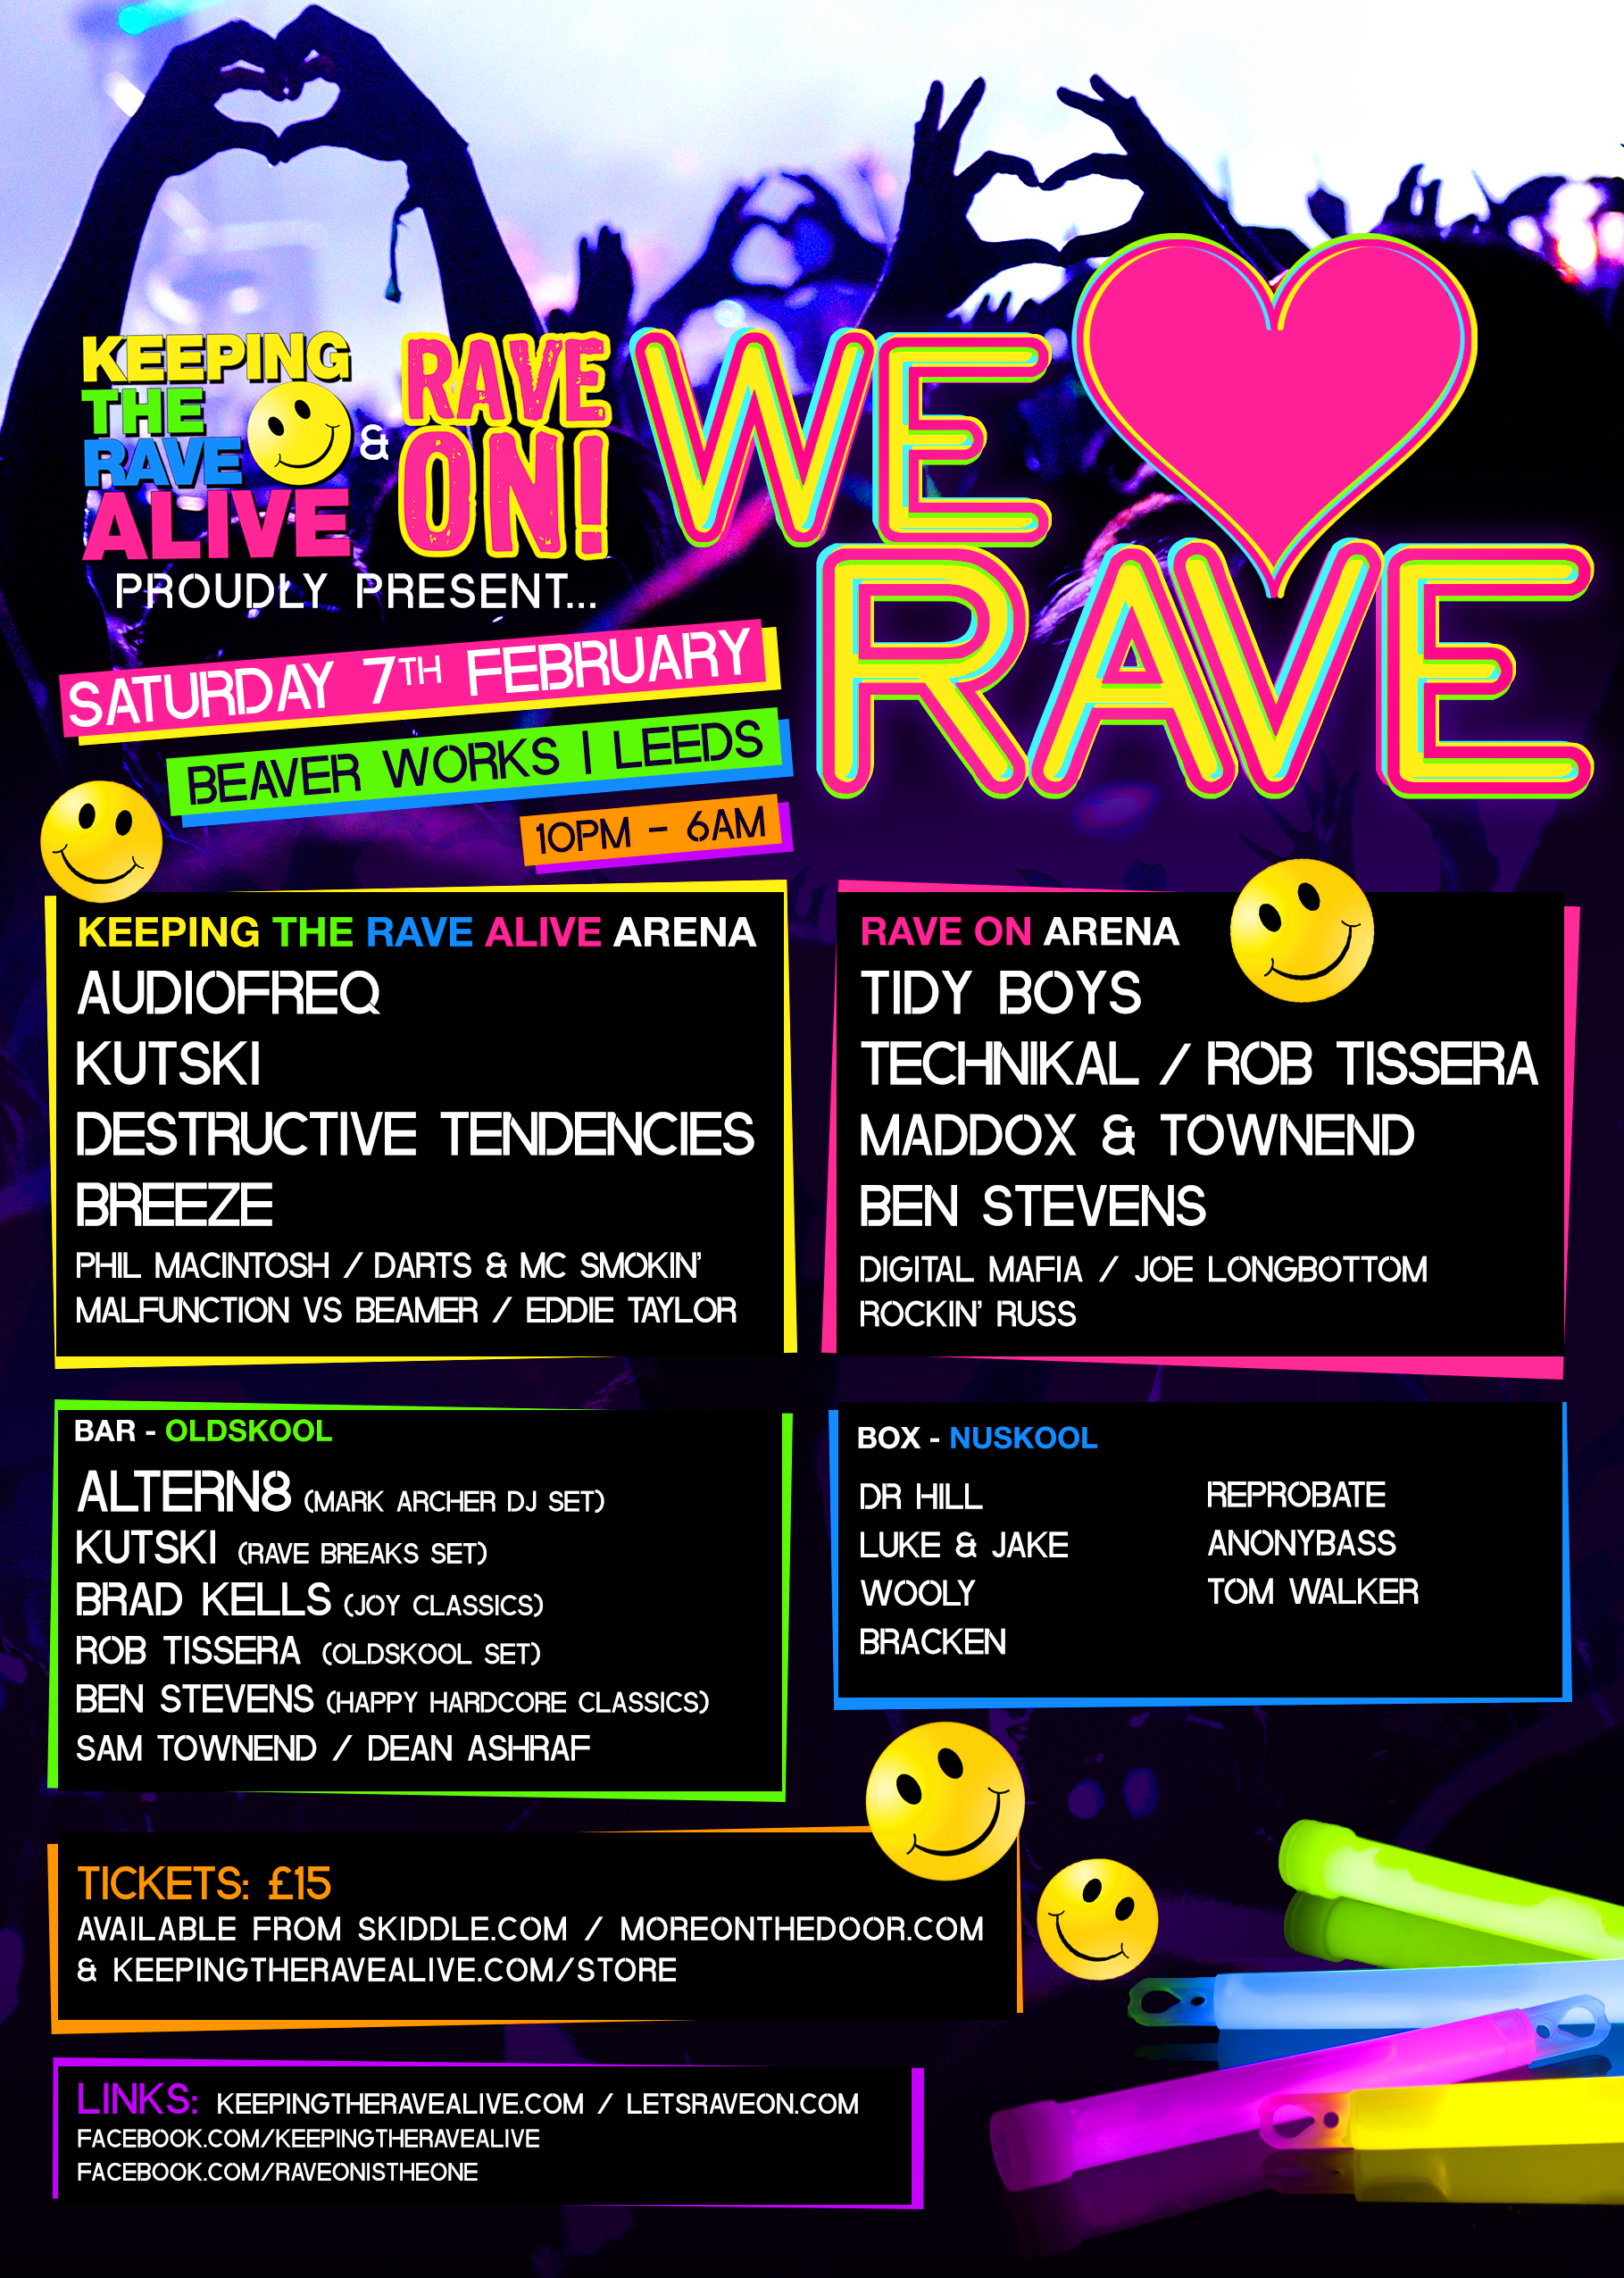 Event Listings Keeping The Rave Alive And Rave On Present We Love Rave Exclusive Hard House